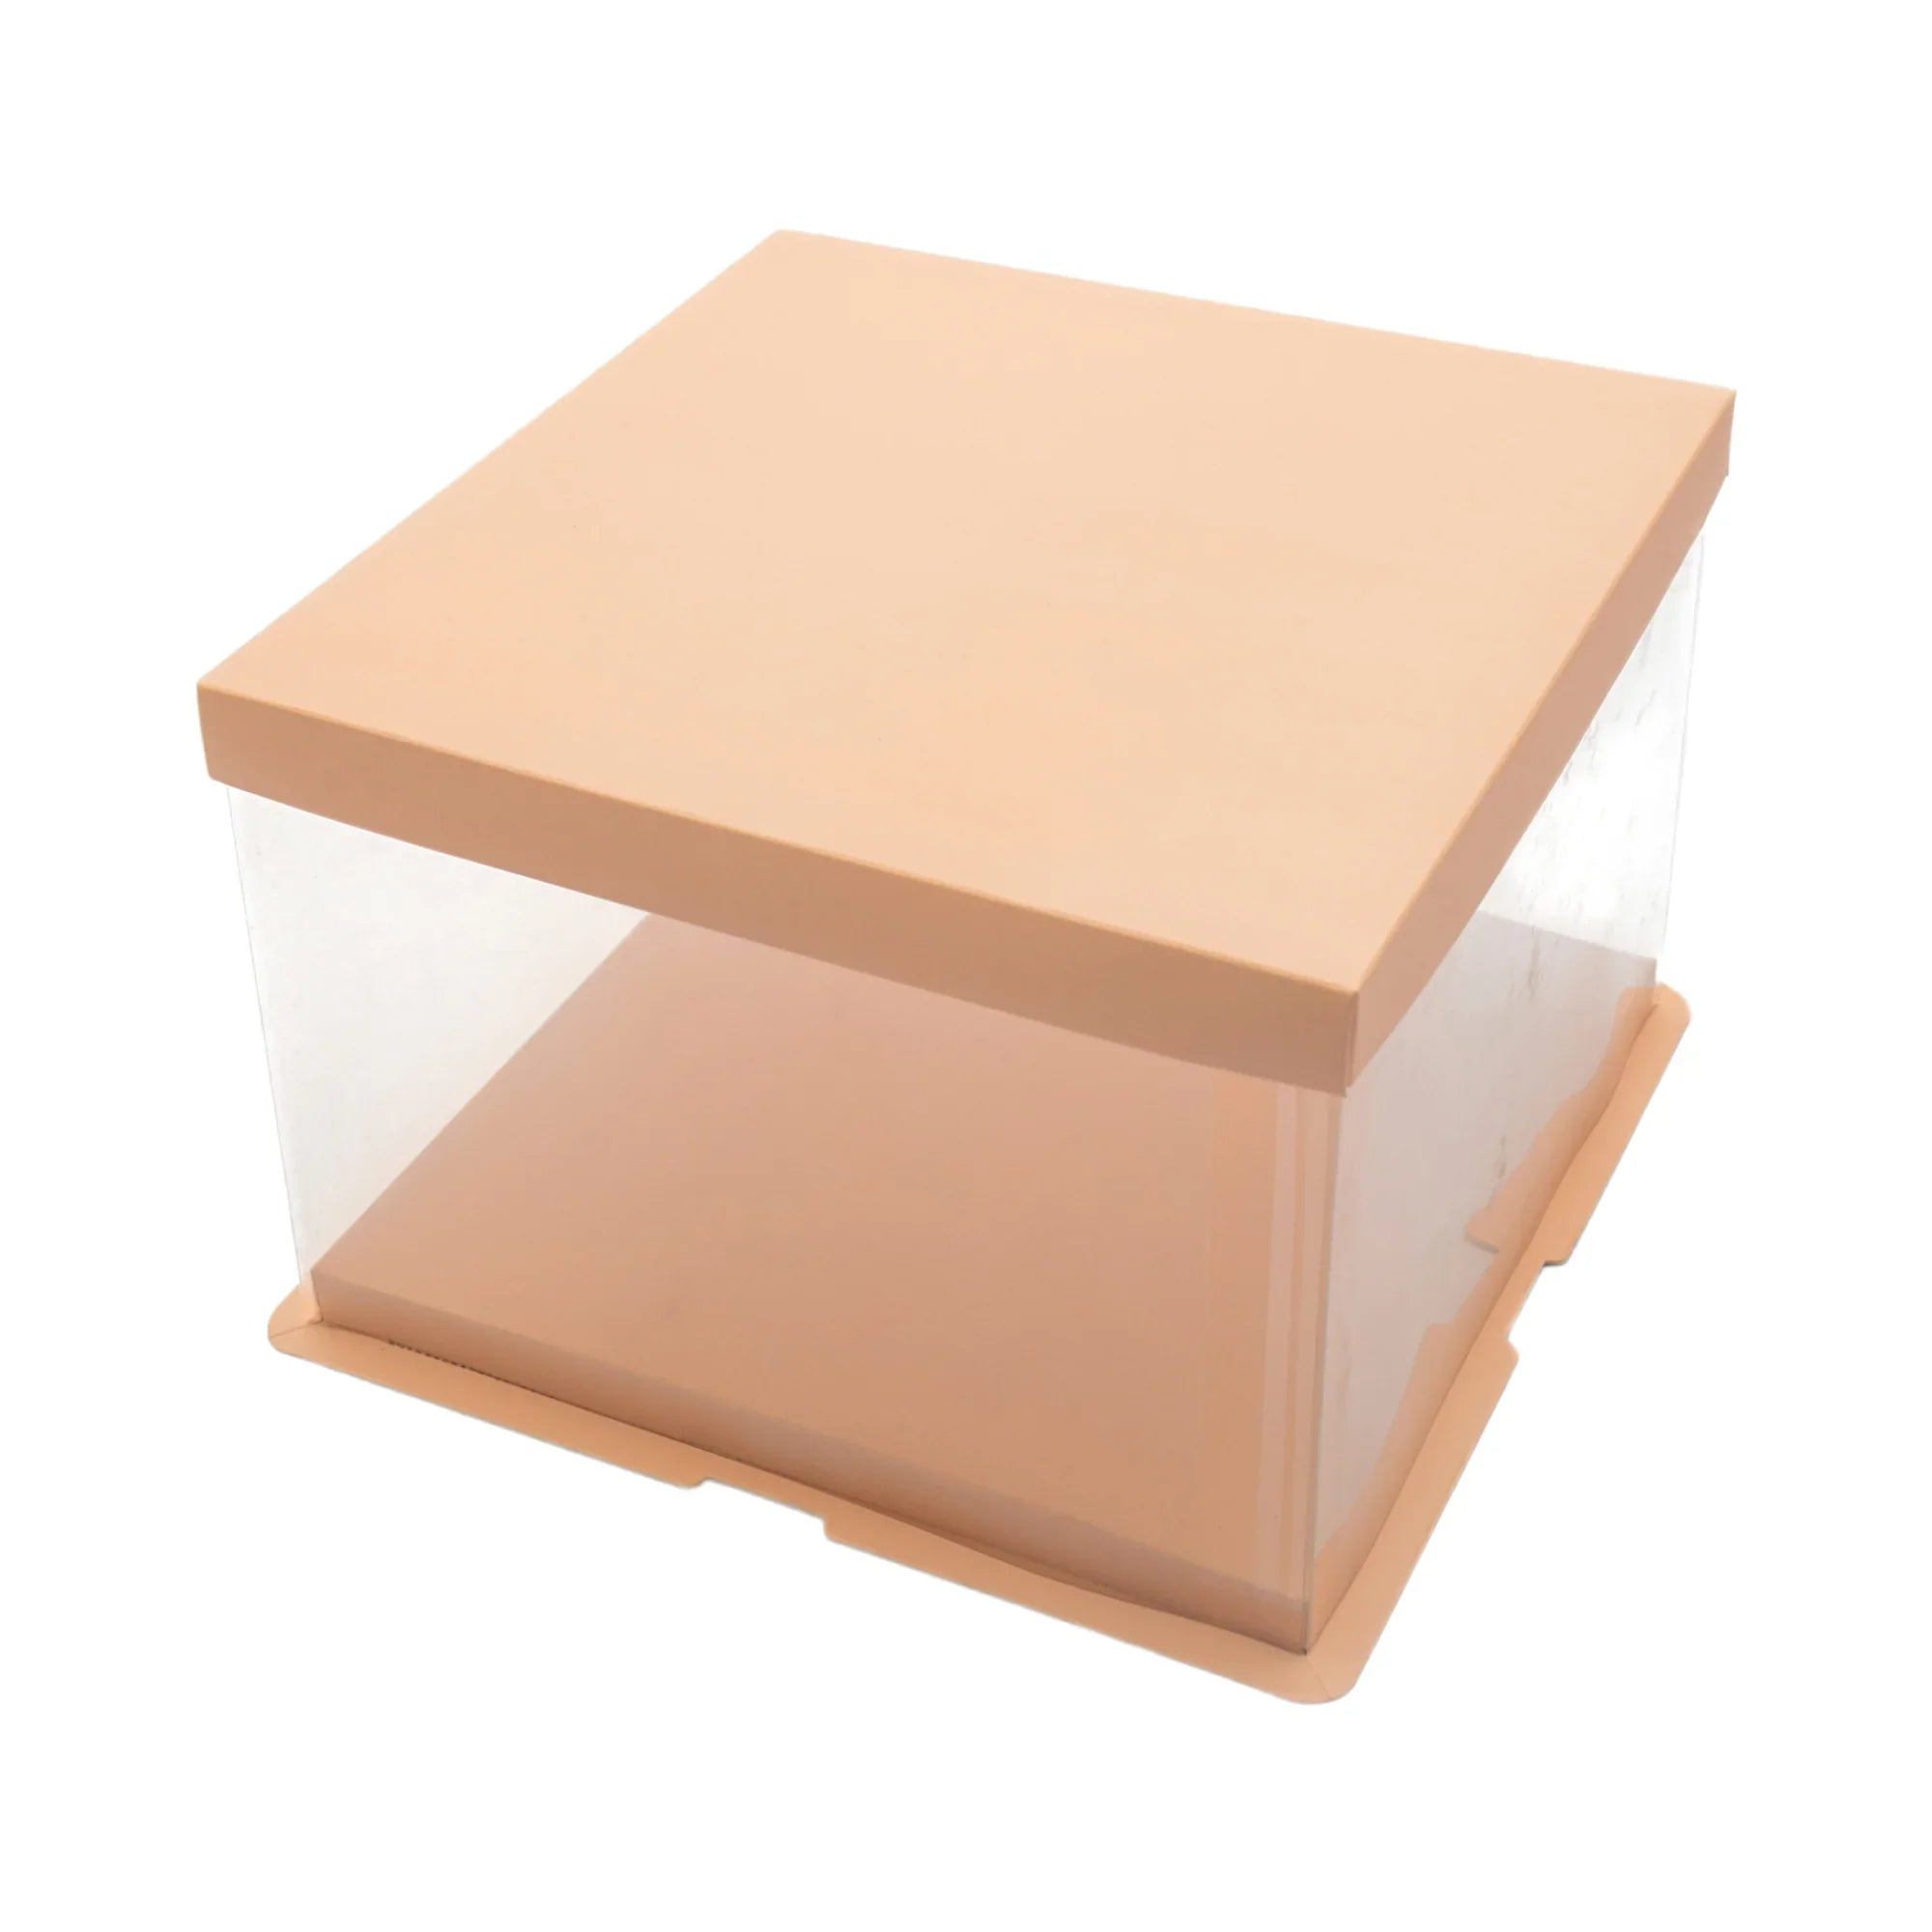 Plastic PVC Gift Box See Through Heightened Square Assorted